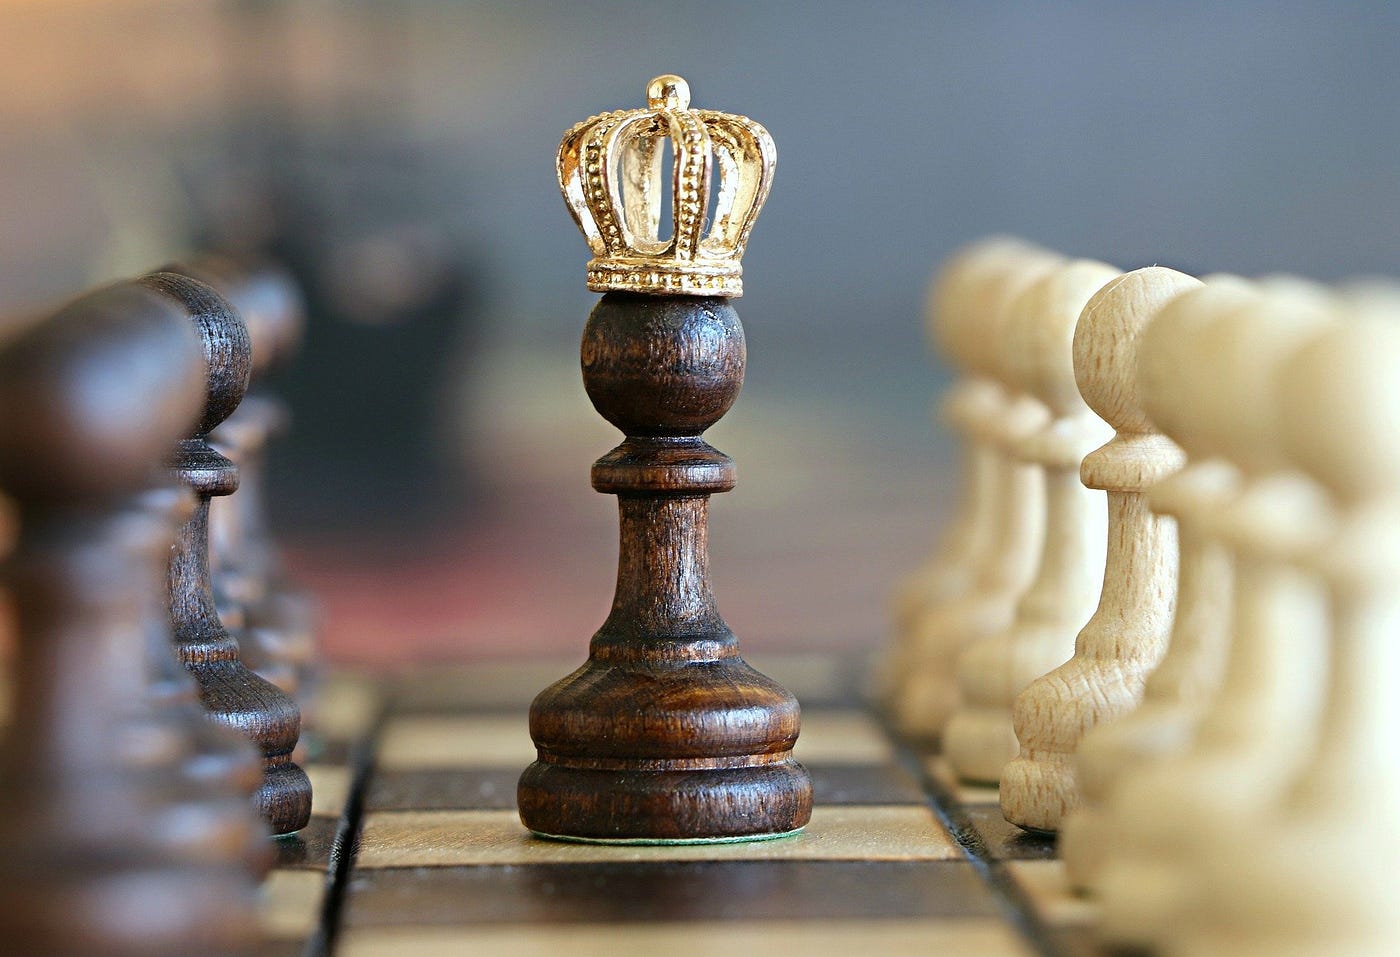 I am 16. Can I start to play chess now or is it too late? - Quora